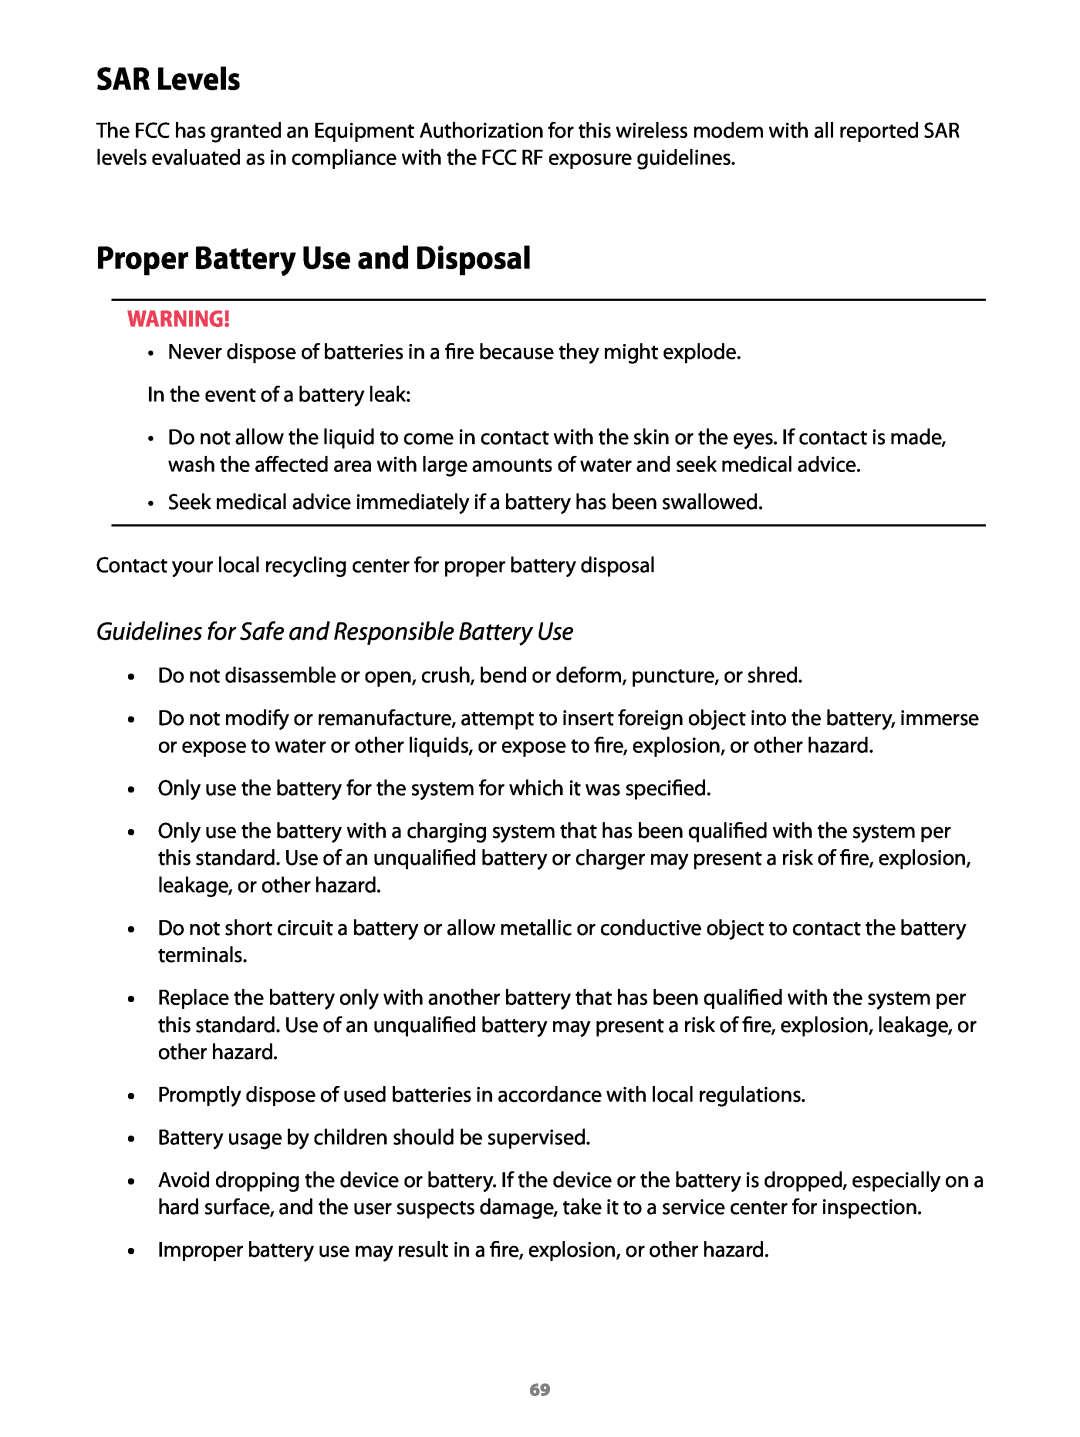 Virgin Mobile 2200 manual SAR Levels, Proper Battery Use and Disposal, Guidelines for Safe and Responsible Battery Use 